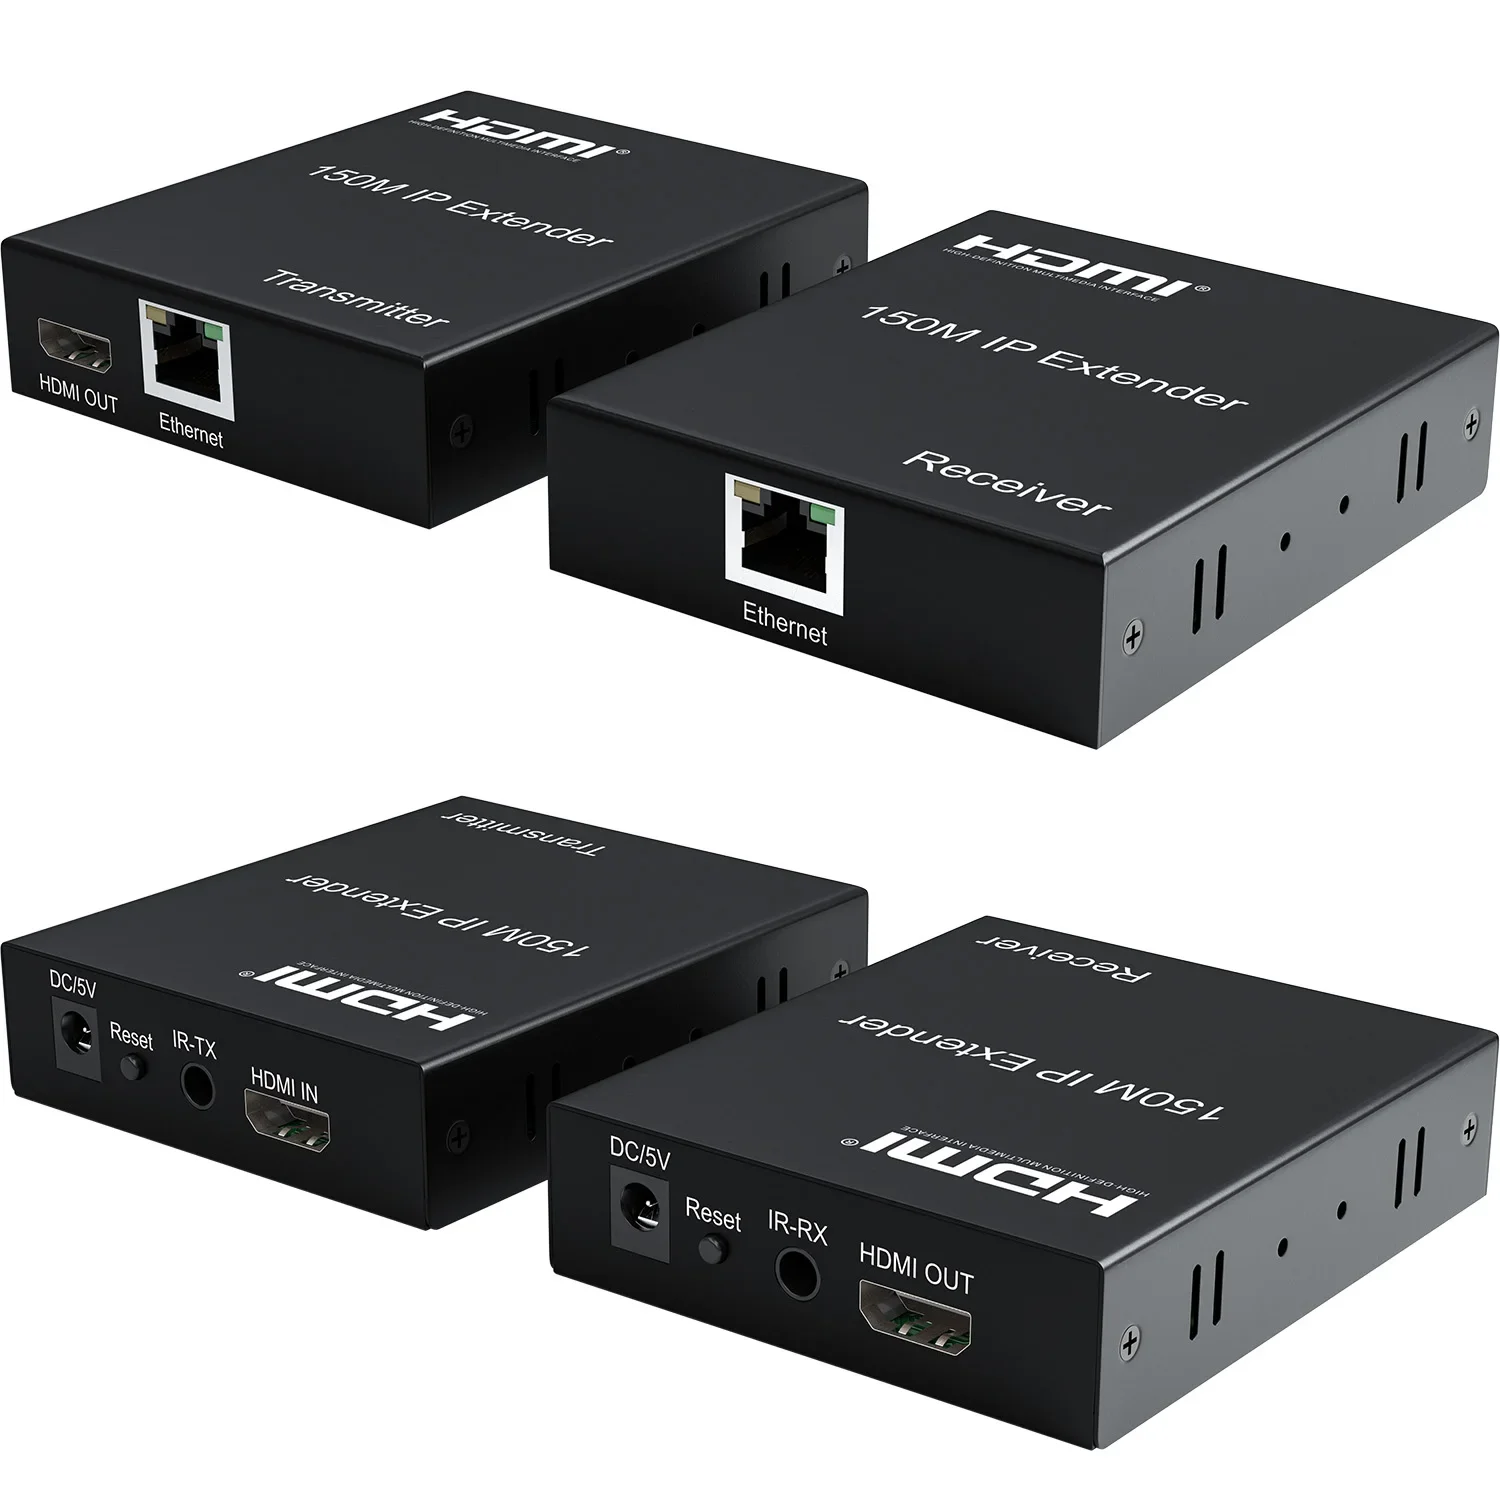 150m IP Extender RJ45 Ports 1080P HDMI Ethernet Extender Video Transmitter and Receiver By Cat5e Cat6 Cable 1 To 1 Many To Many